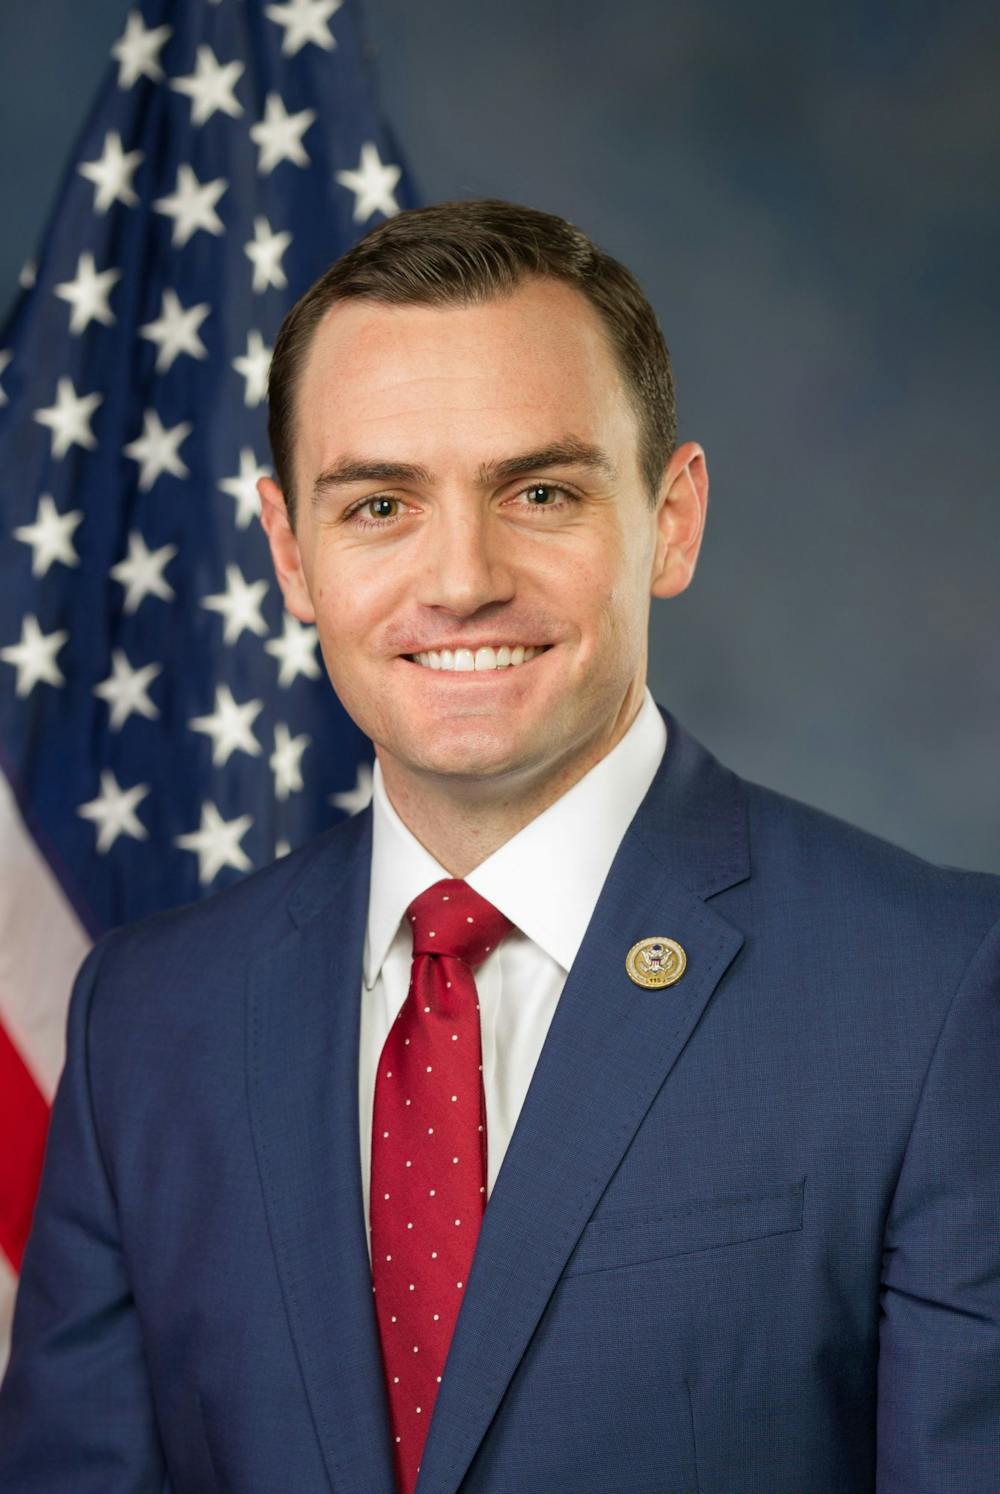 Mike_Gallagher_official_portrait,_115th_congress.jpg